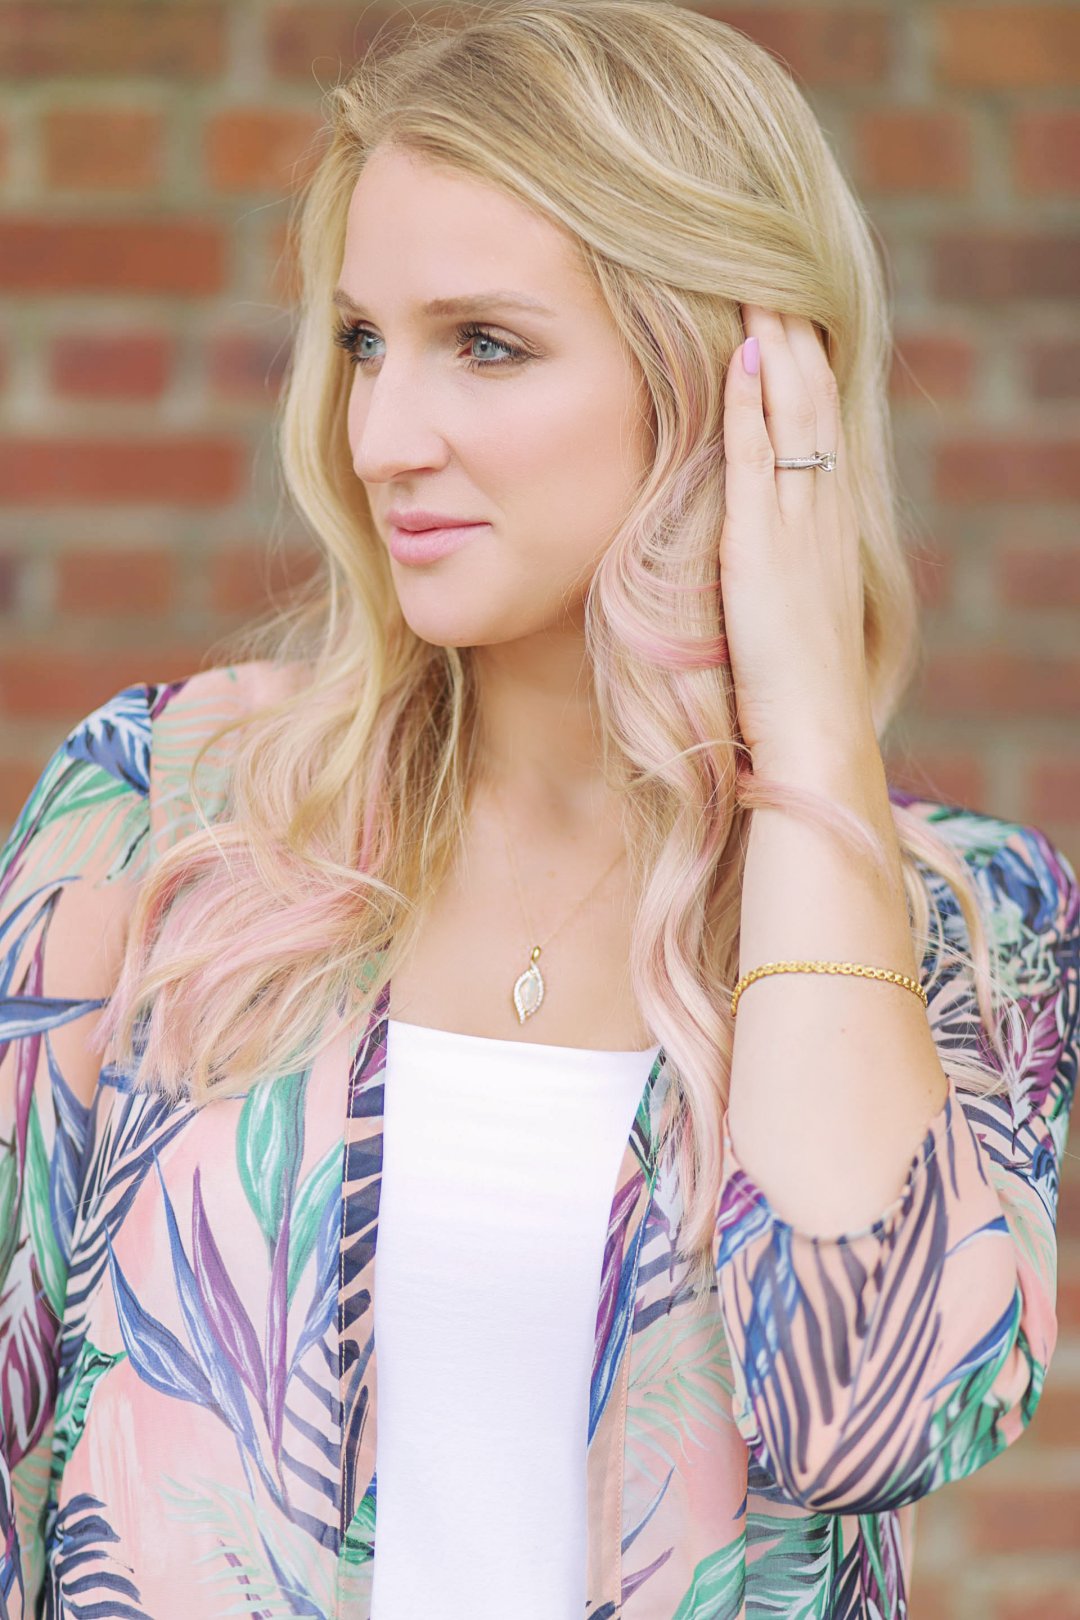 The Perfect Mothers Day Gift: Gold Jewelry for Any Outfit by lifestyle blogger Jessica of Happily Hughes